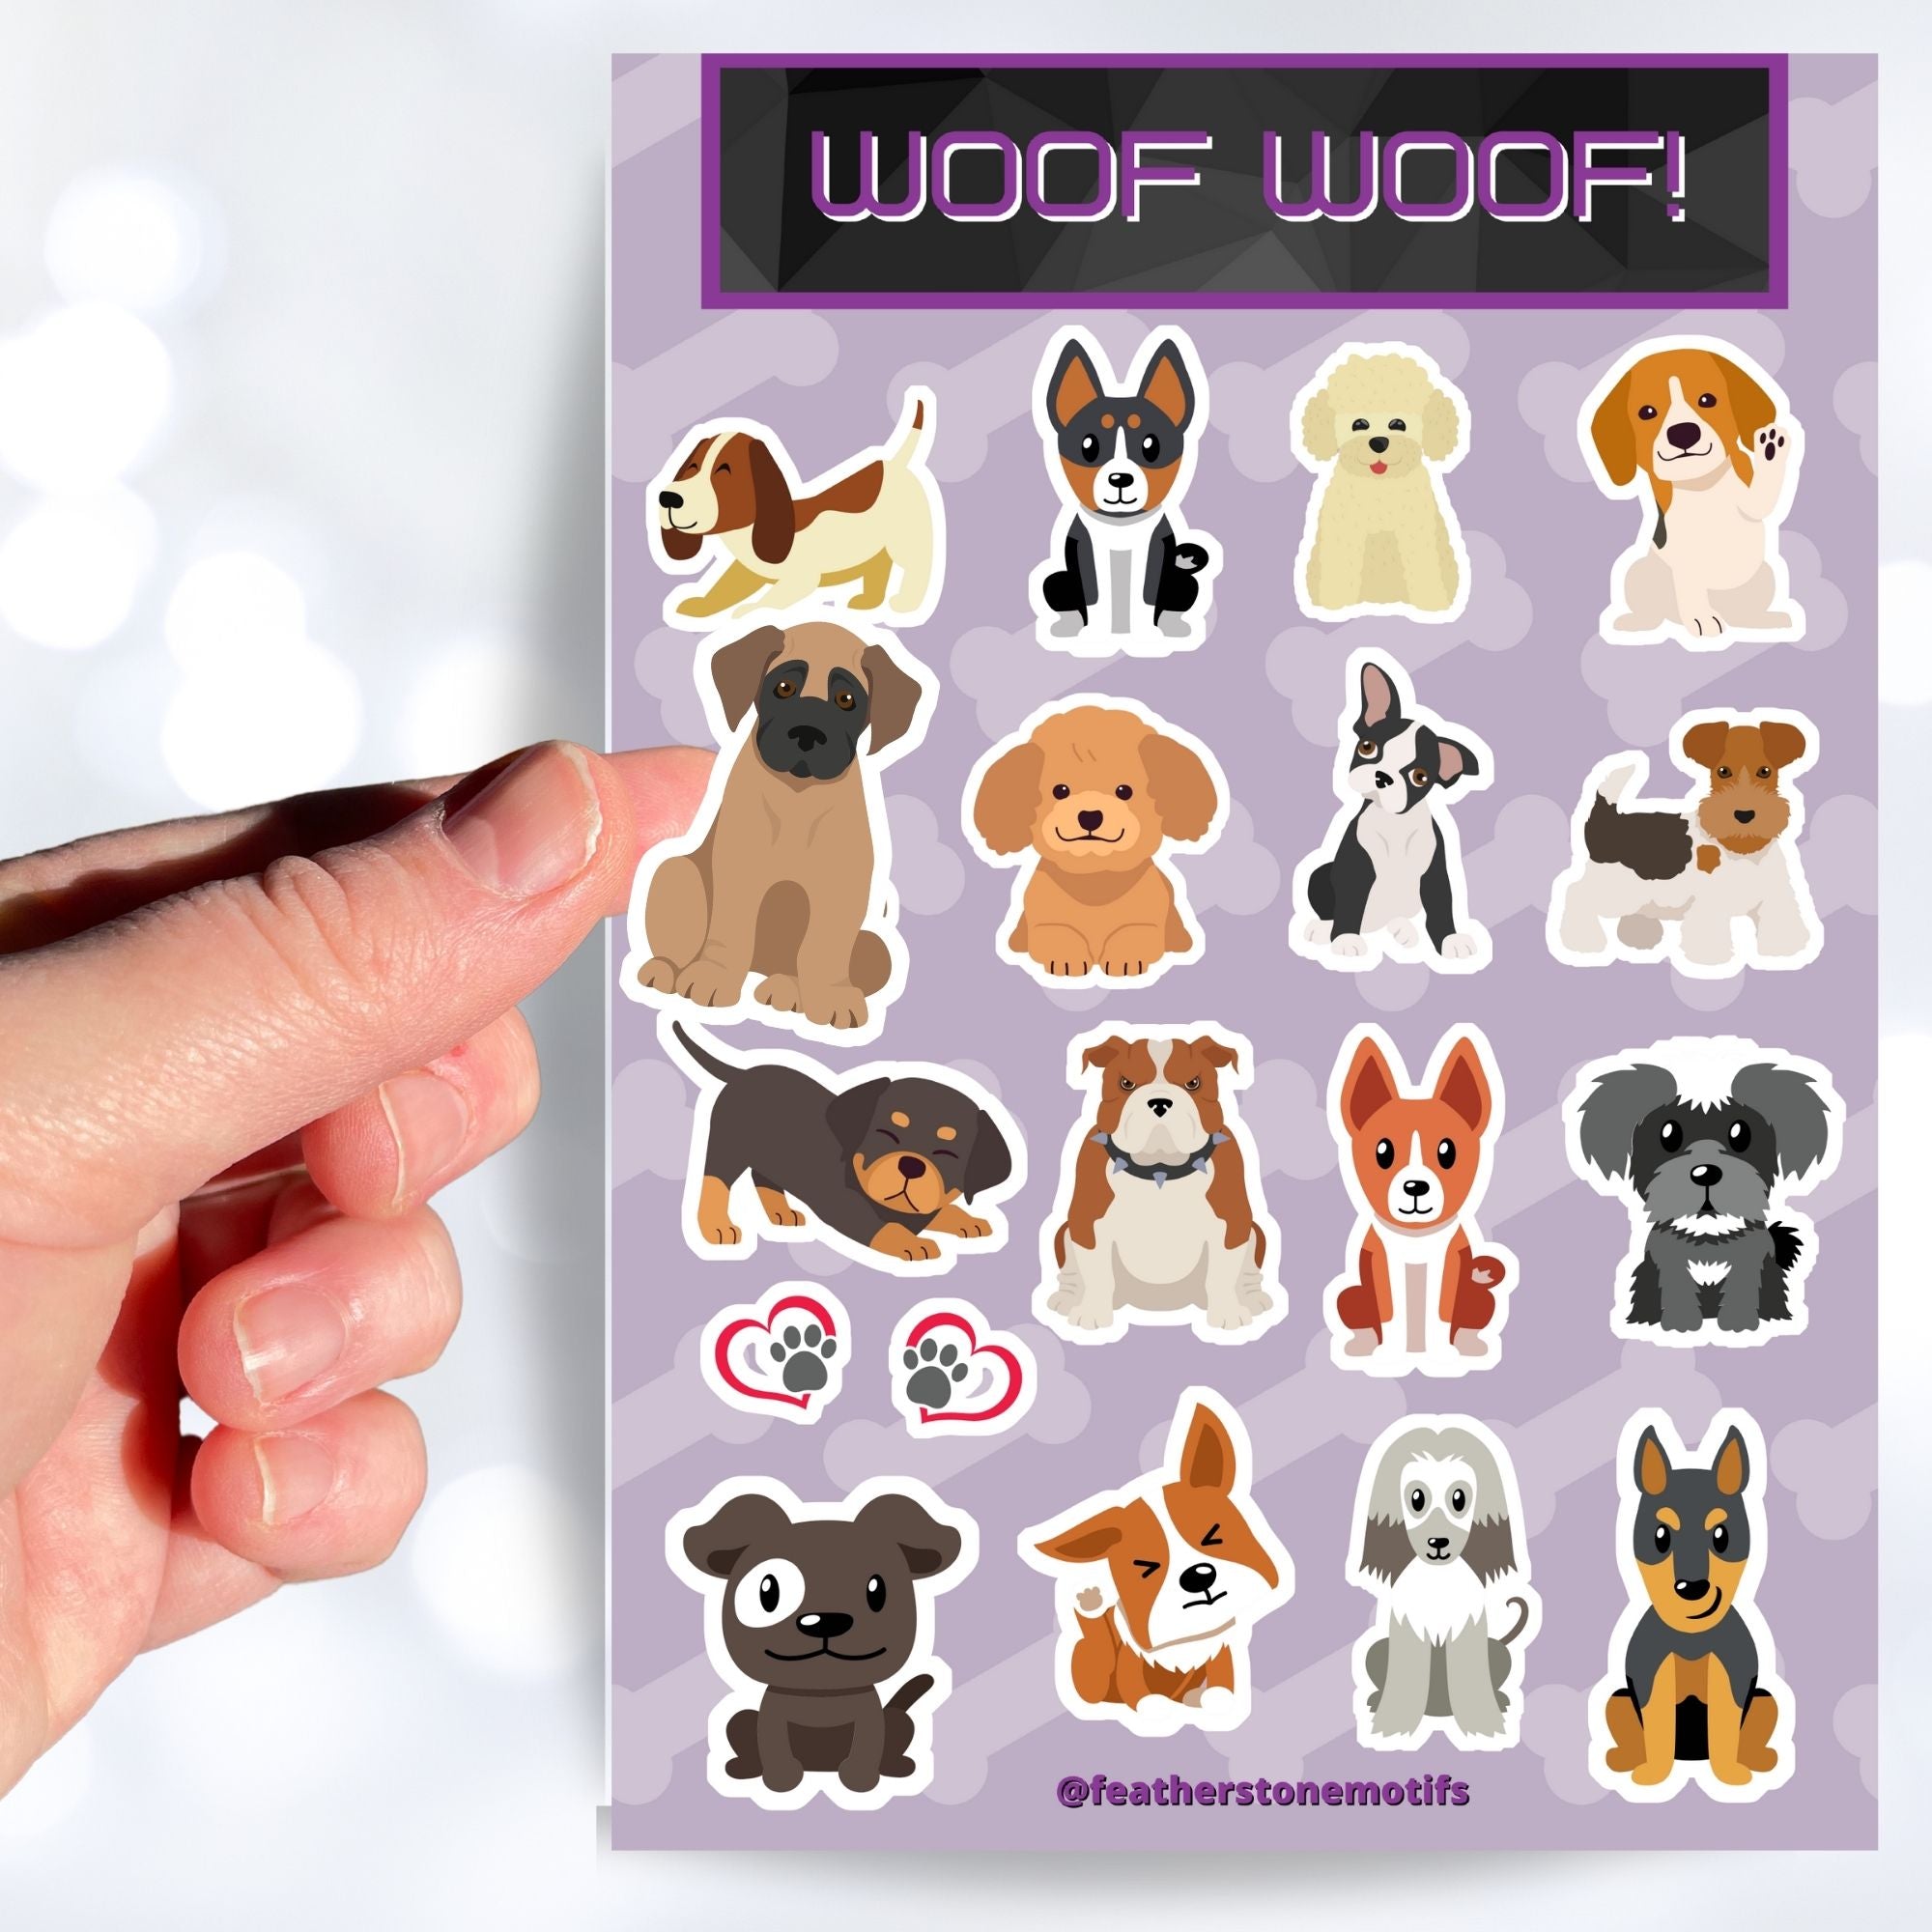 Dog lovers, this sticker sheet is for you! It has sticker images of 16 different dogs plus 2 heart paw stickers. Is your favorite puppy here?  This image shows a hand holding a sticker of a Great Dane puppy above the sticker sheet. 